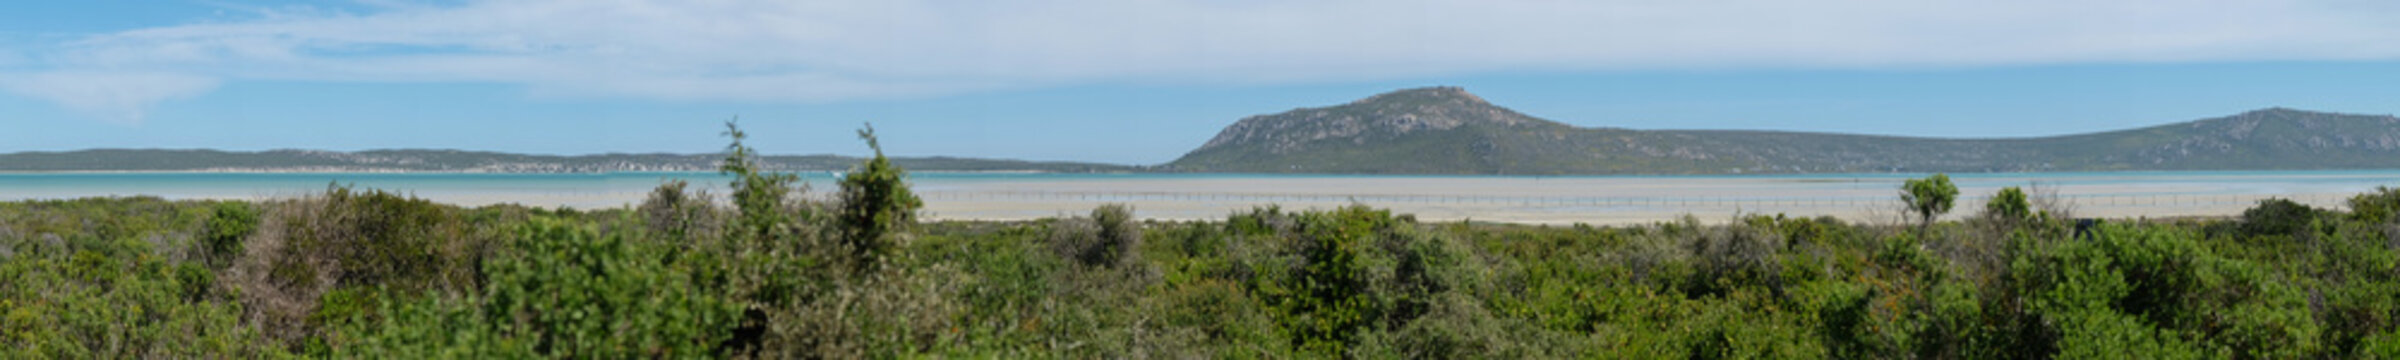 Overlooking fynbos field with a lagoon in the background